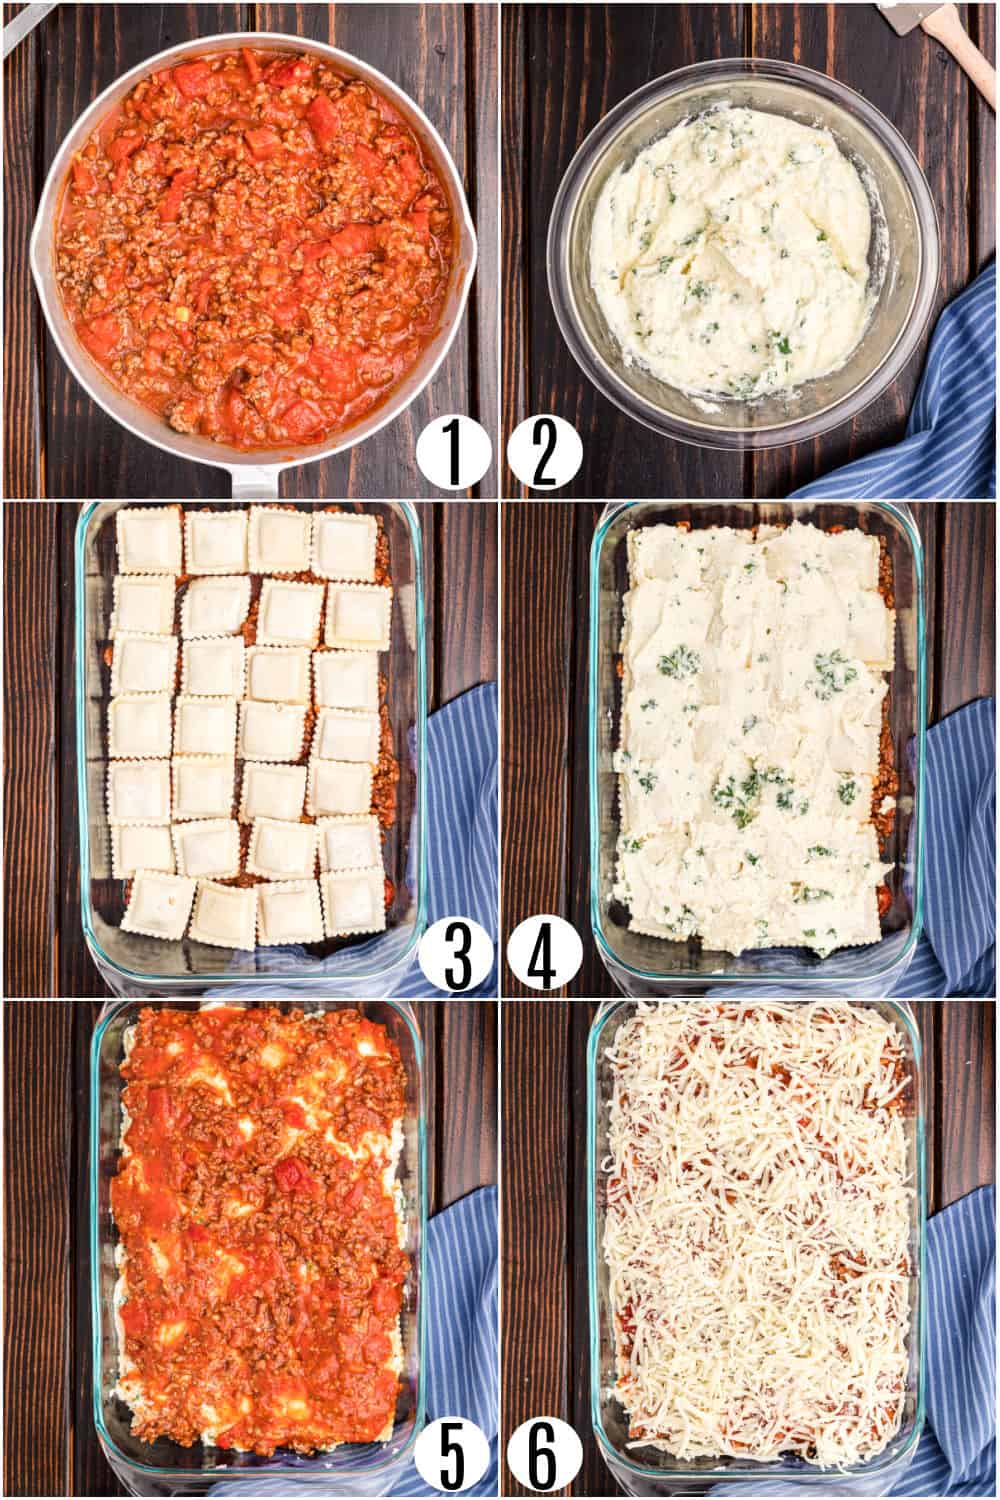 Step by step photos showing how to make ravioli lasagna casserole.